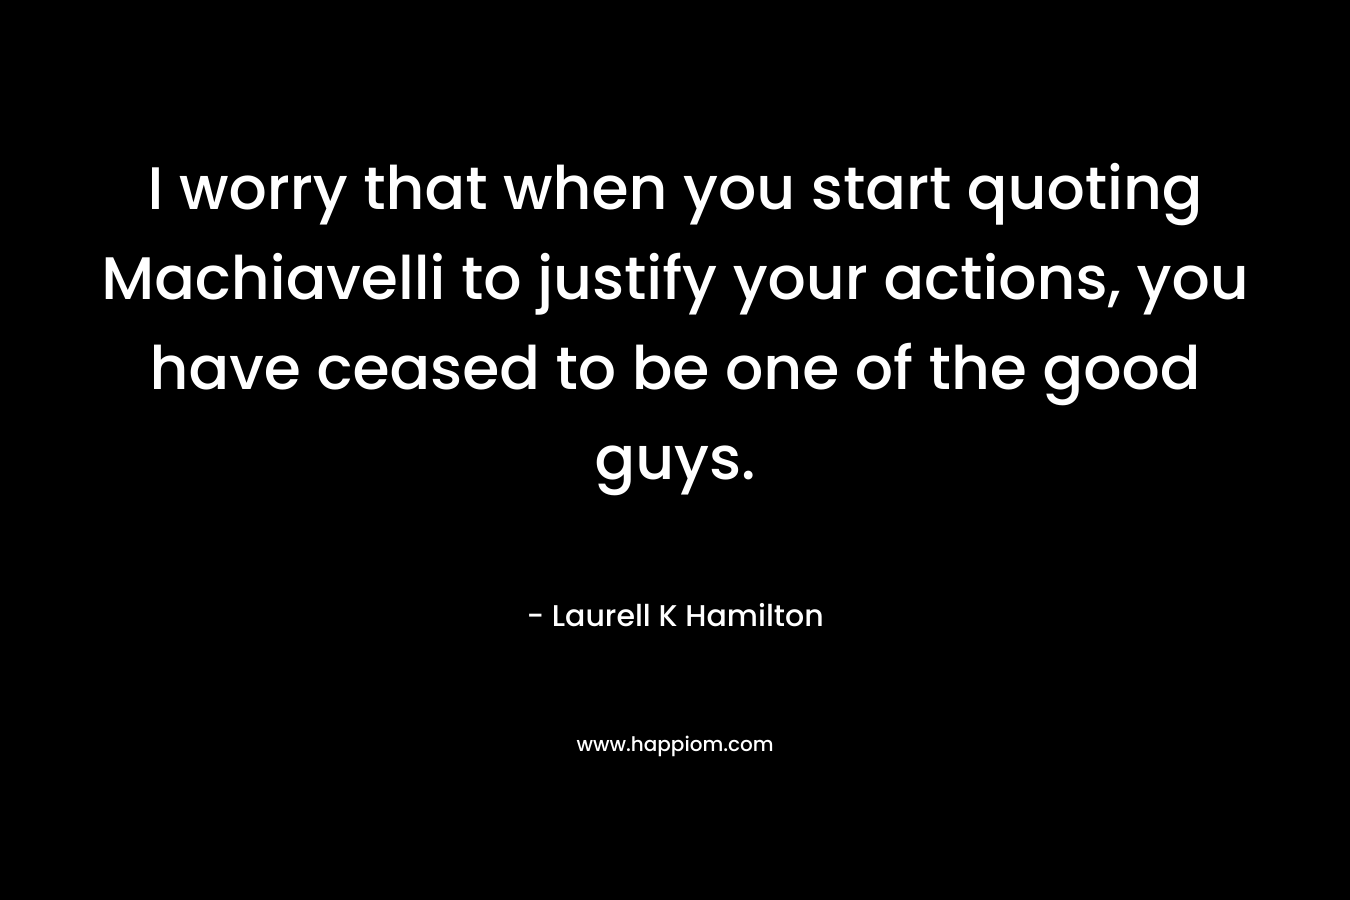 I worry that when you start quoting Machiavelli to justify your actions, you have ceased to be one of the good guys. – Laurell K Hamilton